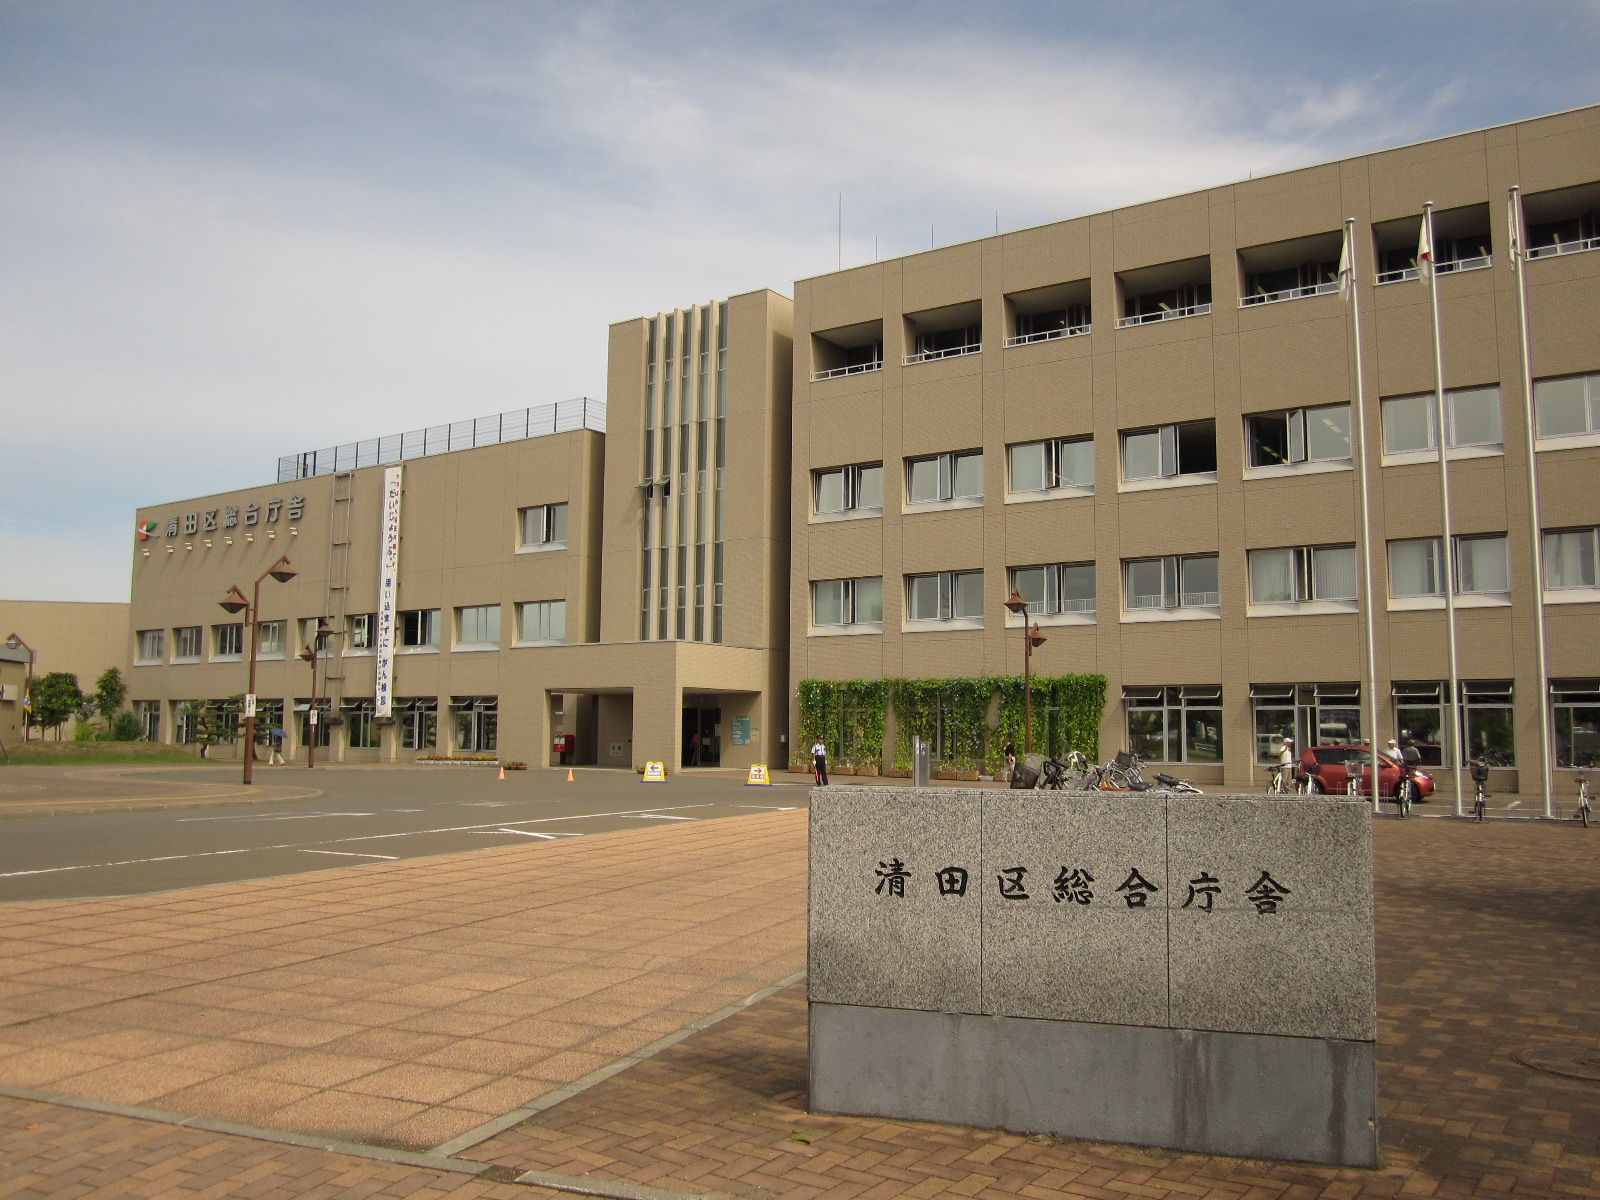 Government office. 300m to Sapporo Kiyota Ward (government office)